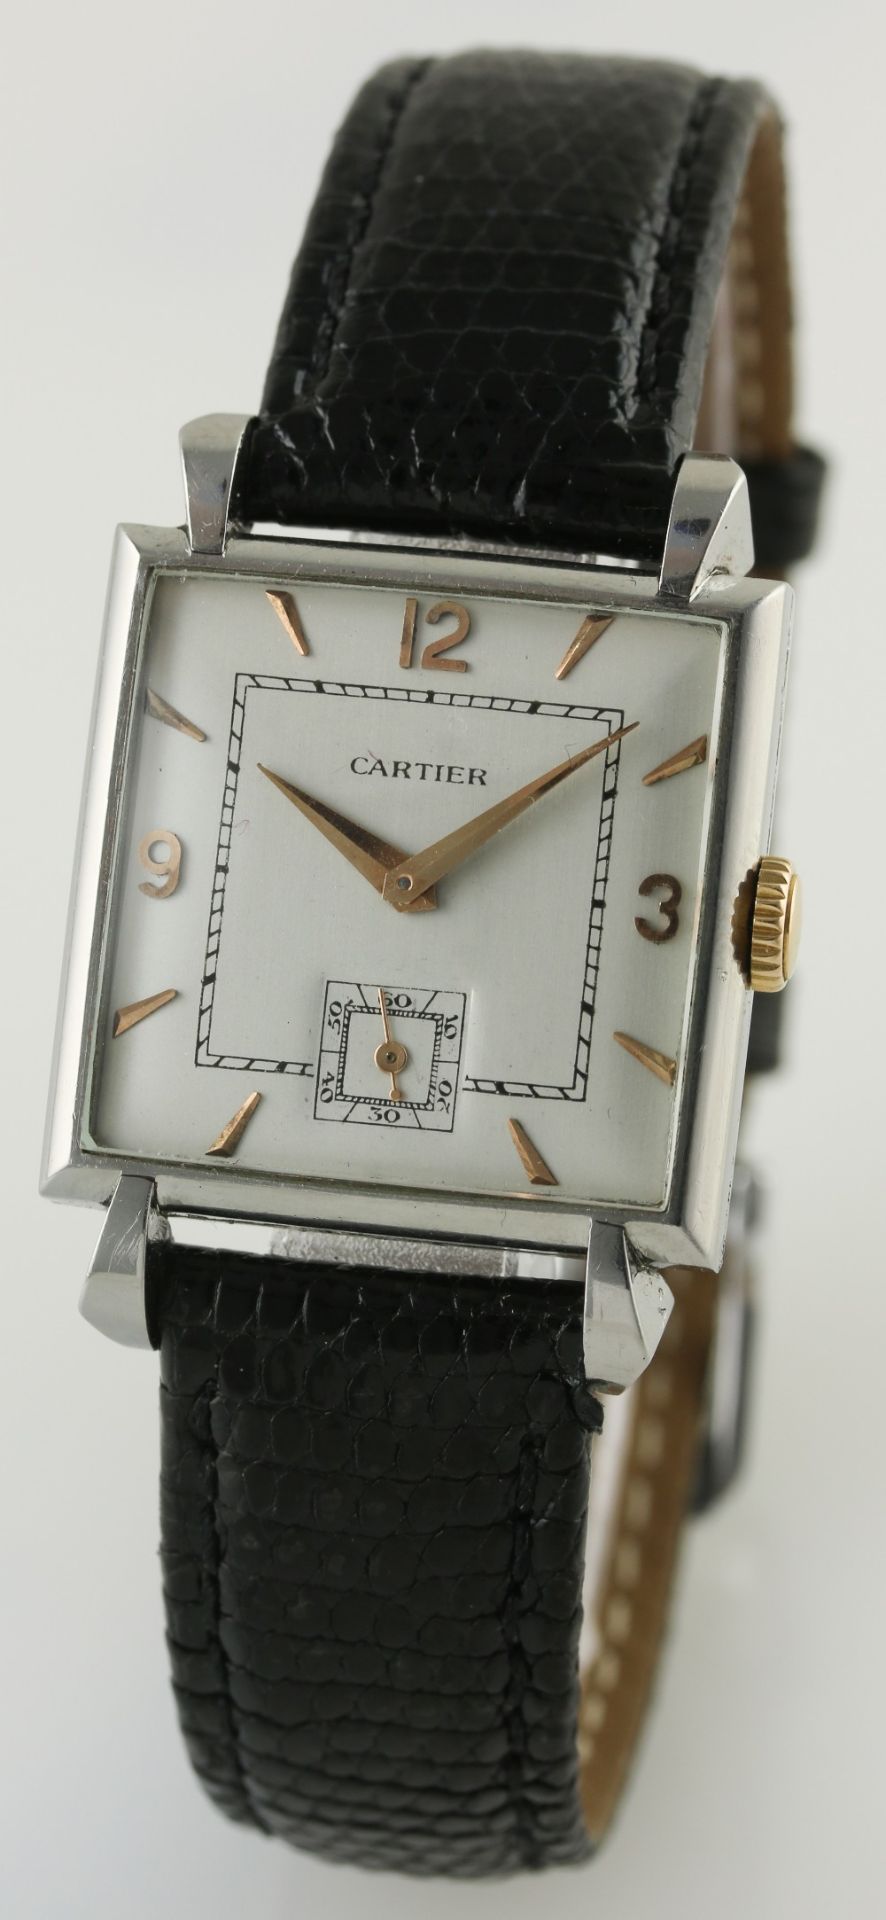 A GENTLEMAN'S STAINLESS STEEL CARTIER WRIST WATCH CIRCA 1950, MADE BY JAEGER-LECOULTRE D: Silver - Image 2 of 8